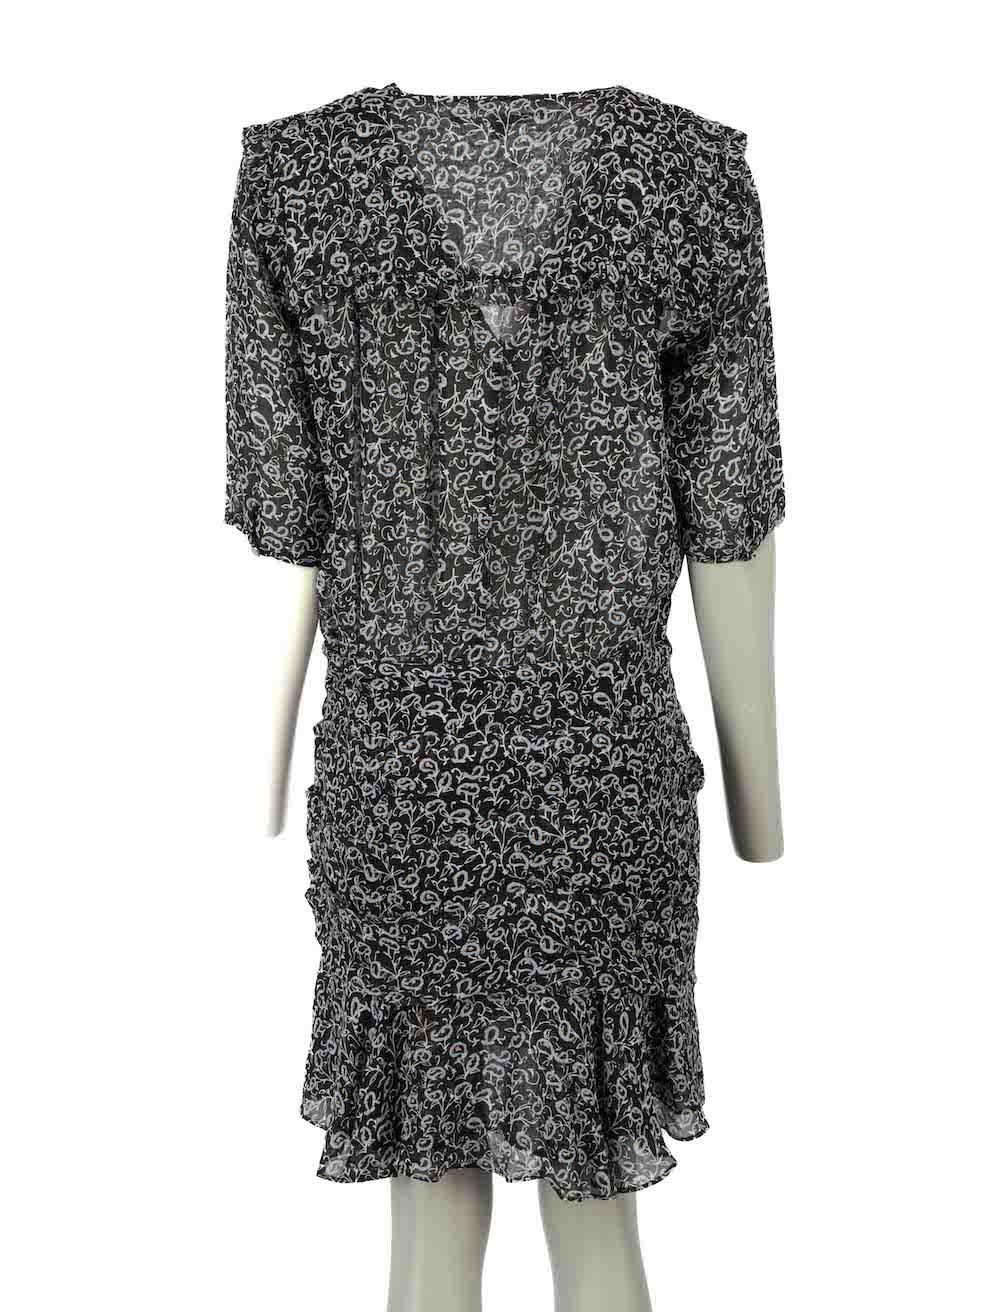 Veronica Beard Black Floral Print Sheer Dress Size S In Good Condition For Sale In London, GB